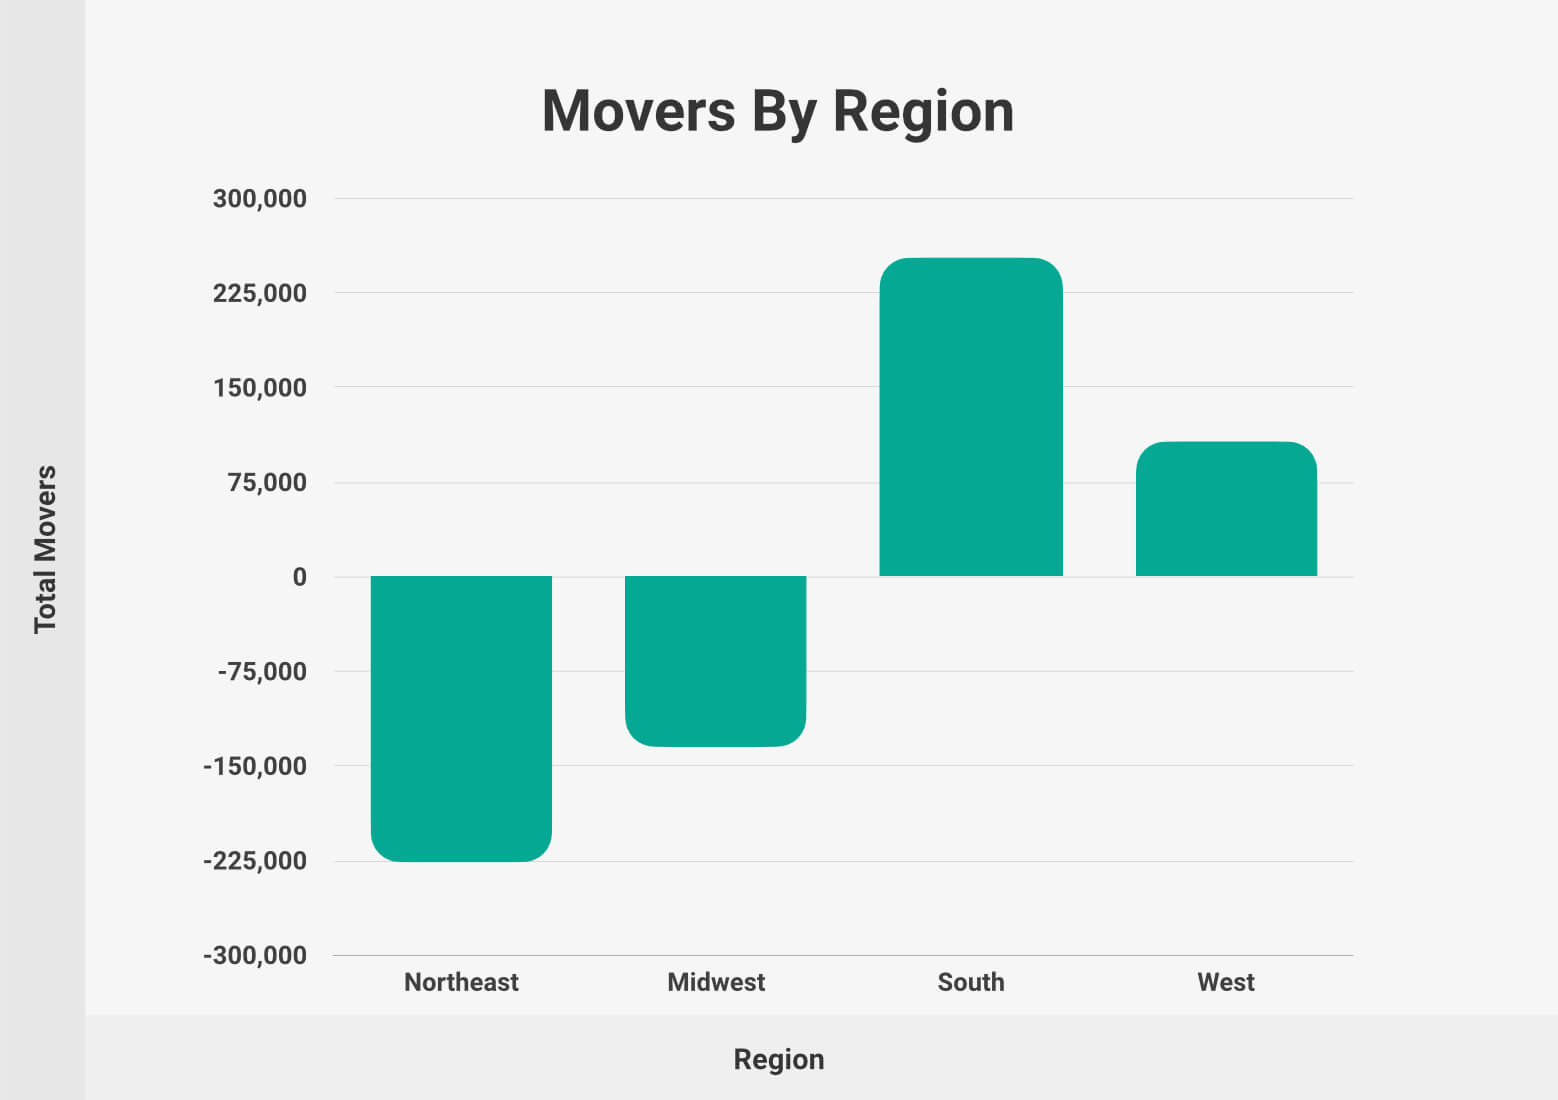 Movers by Region